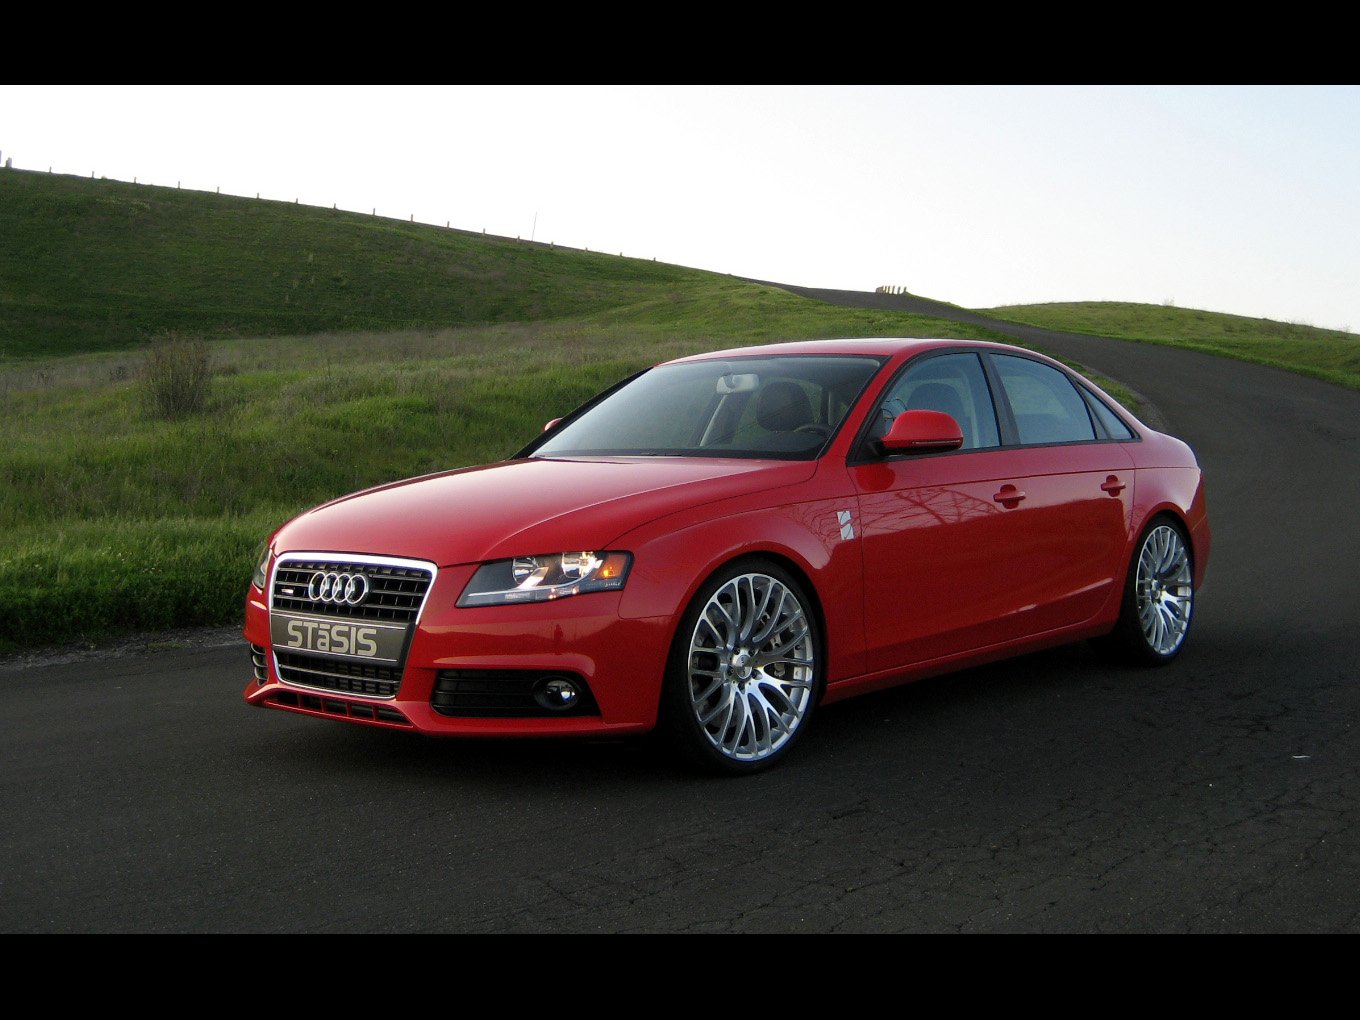 Ауди а 6 б 8. Audi a4 b8 Red. Ауди а4 в8. Audi a4 Red Tuning. Audi a4 b8 кузов.